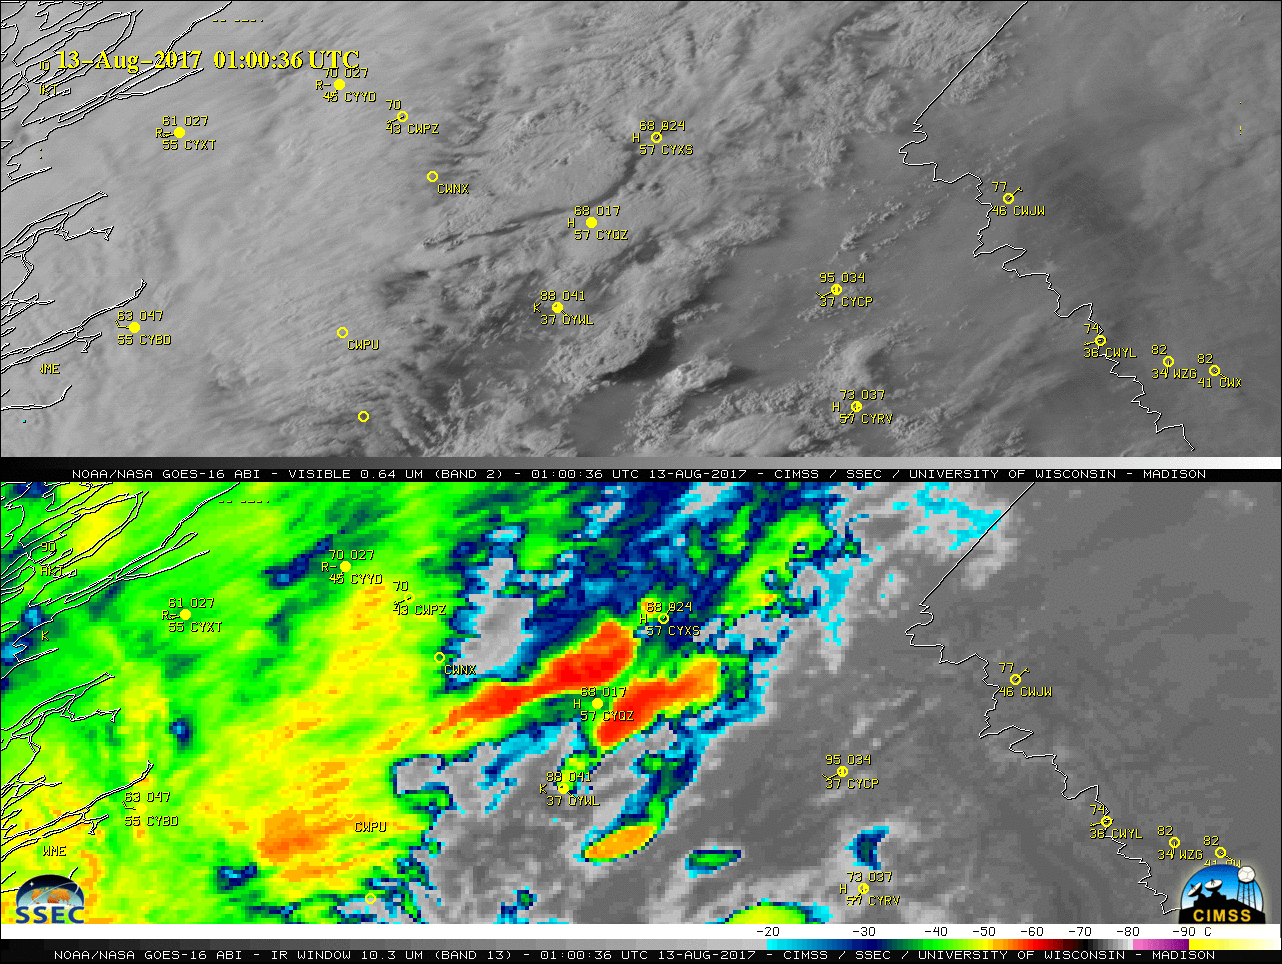 GOES-16 Visible (0.64 µm) and Infrared Window (10.3 µm) images, with hourly surface reports plotted in yellow [click to play animation]